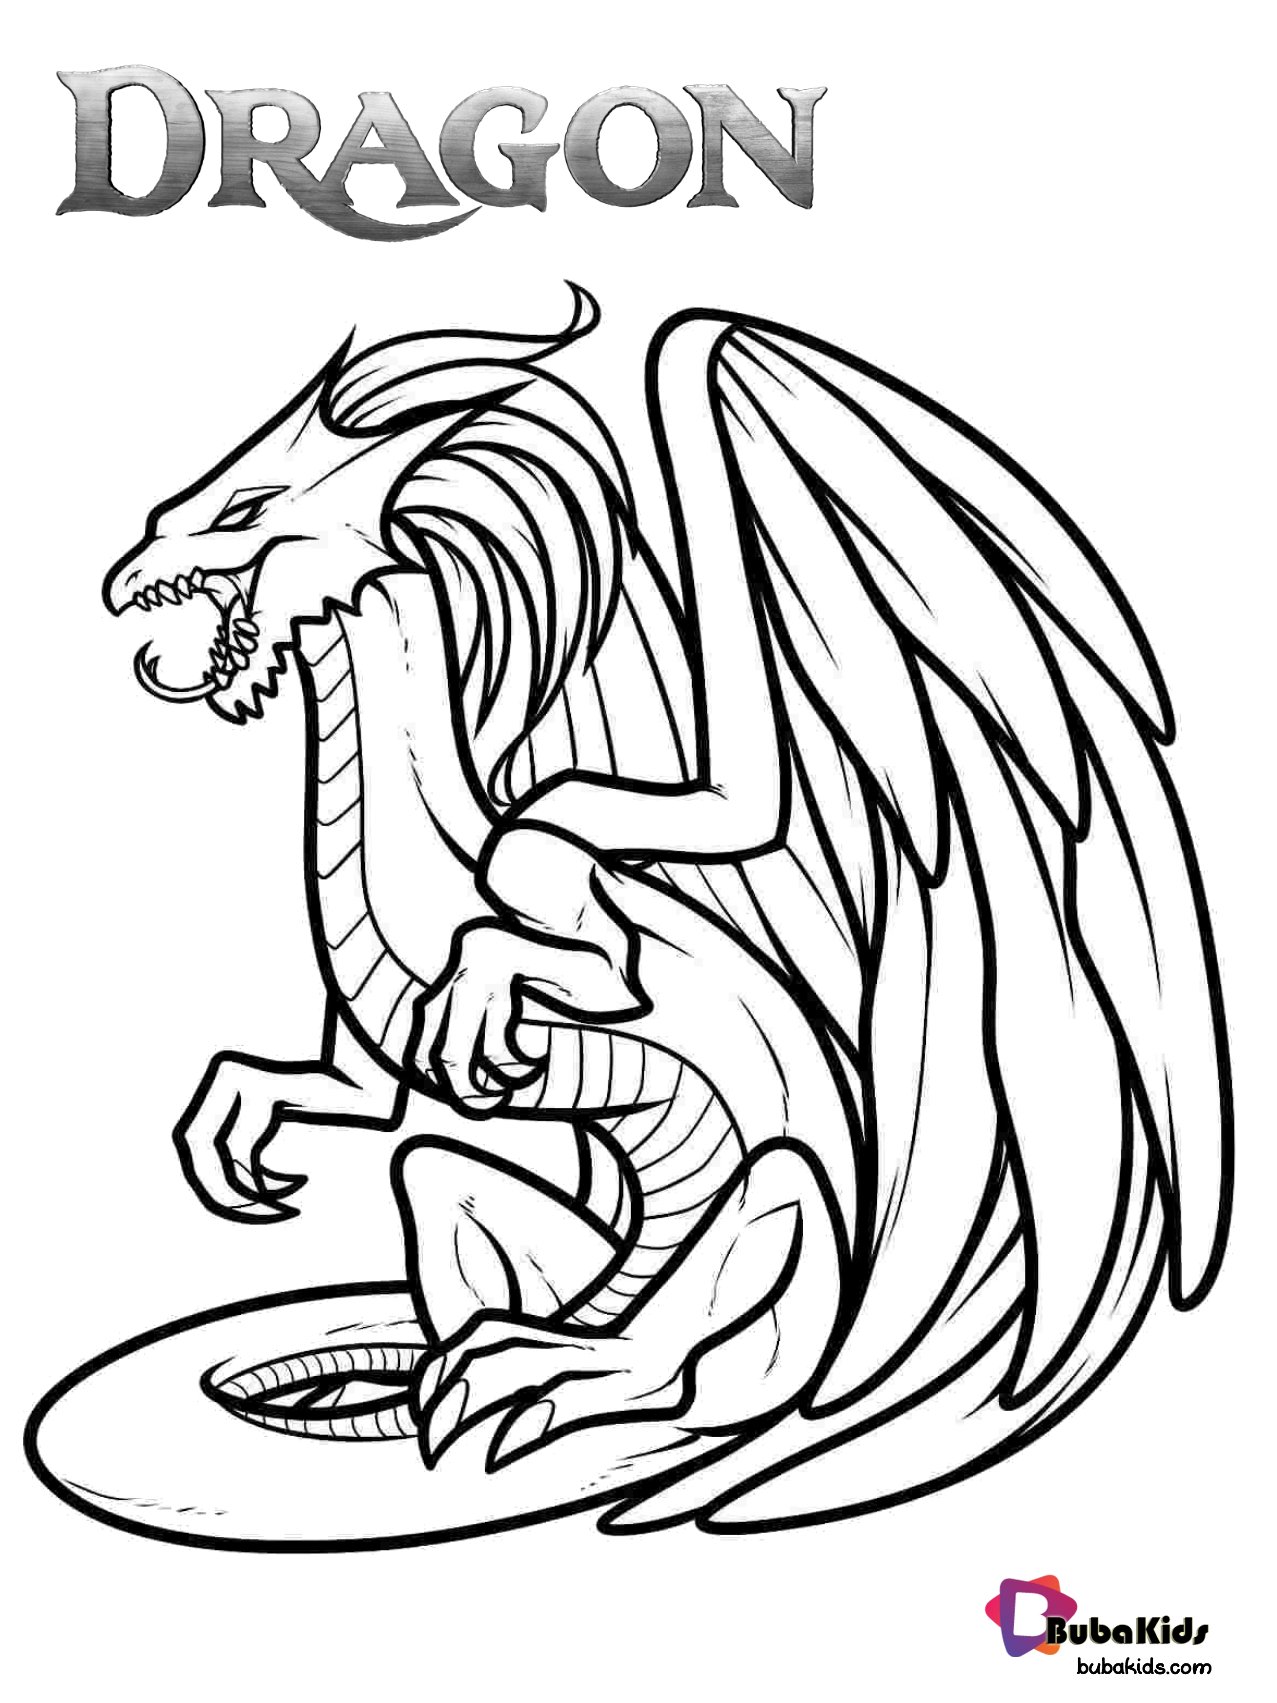 Dragon the mythical creature free coloring page.